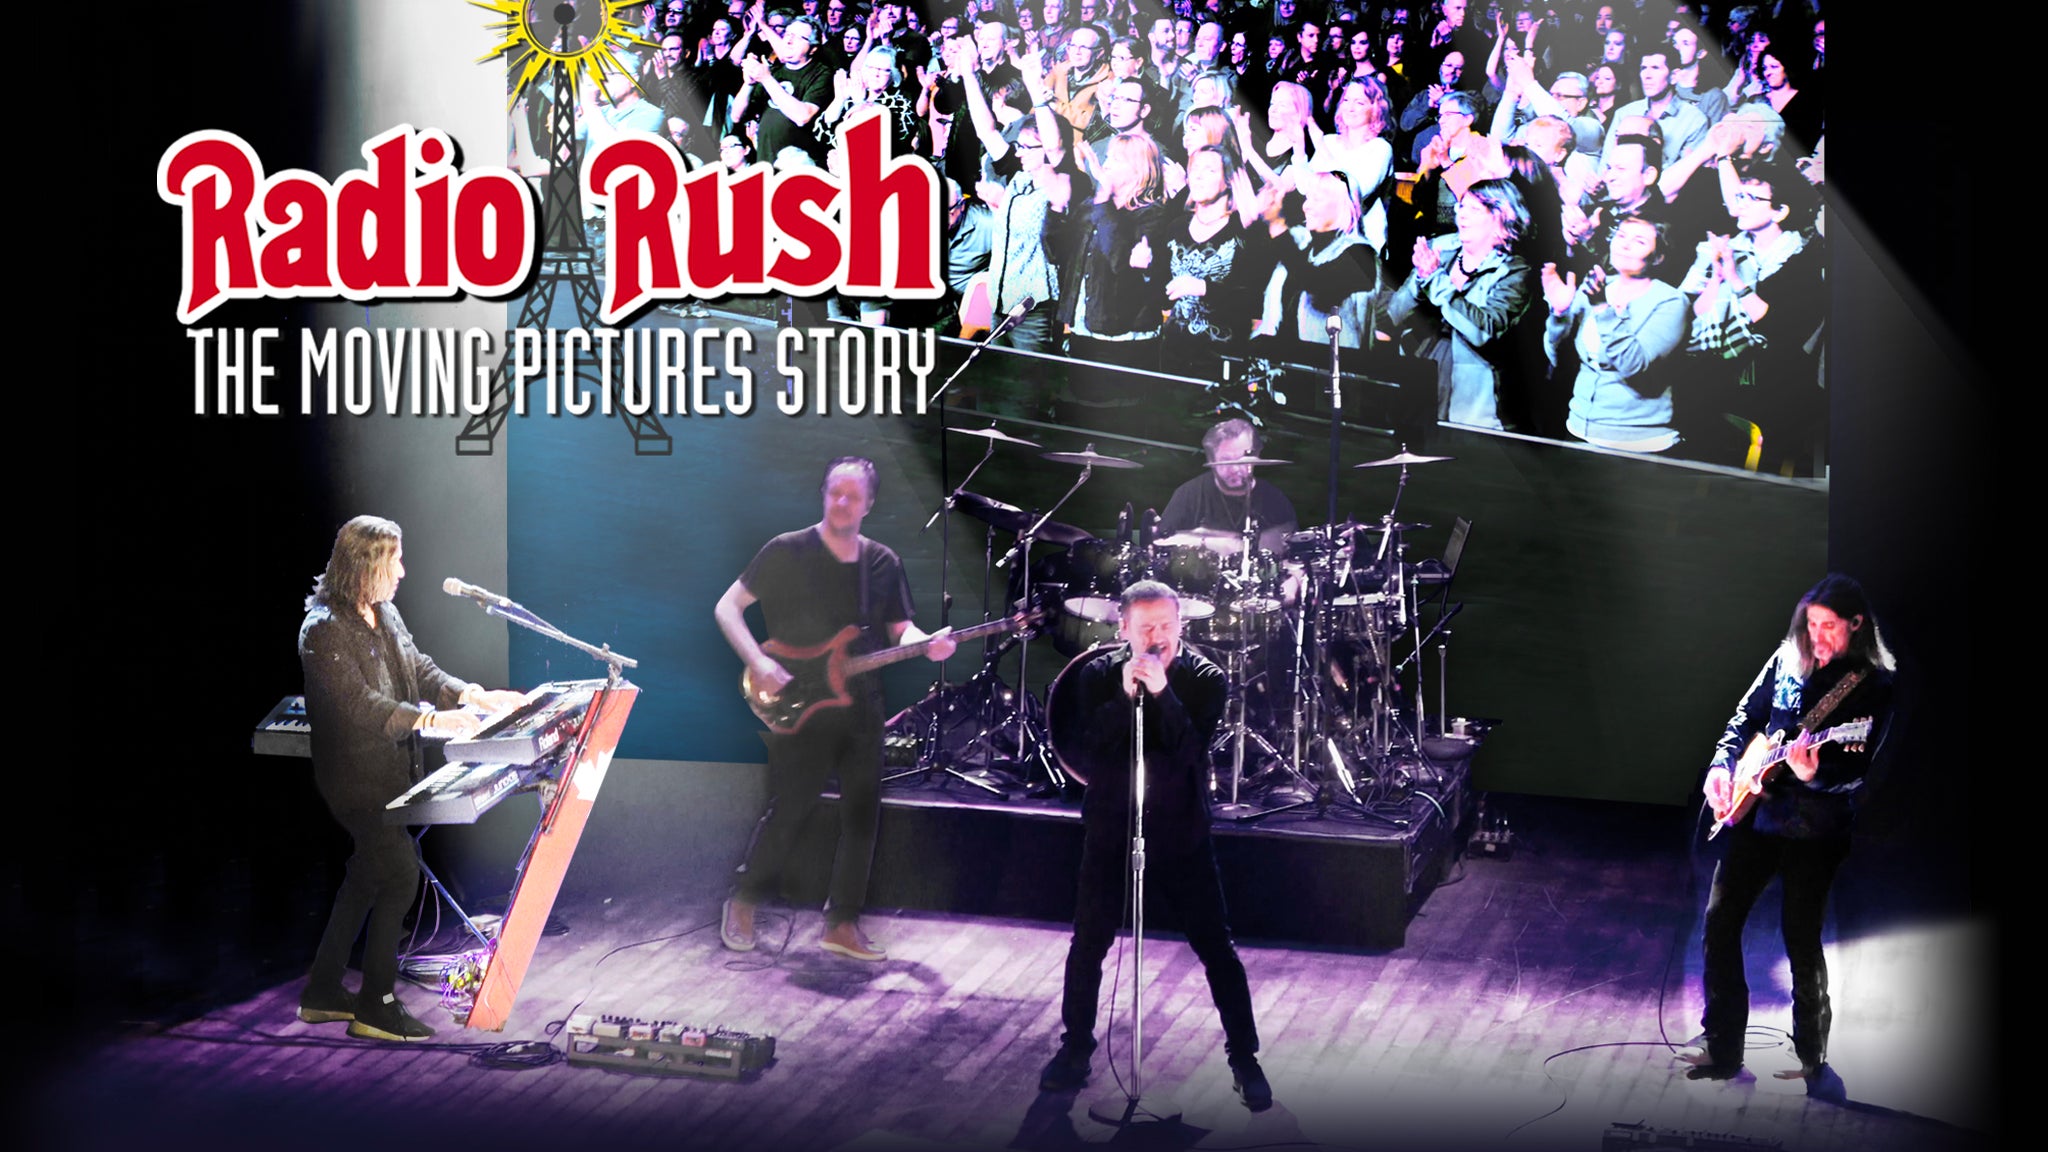 Radio Rush - The Moving Pictures Story